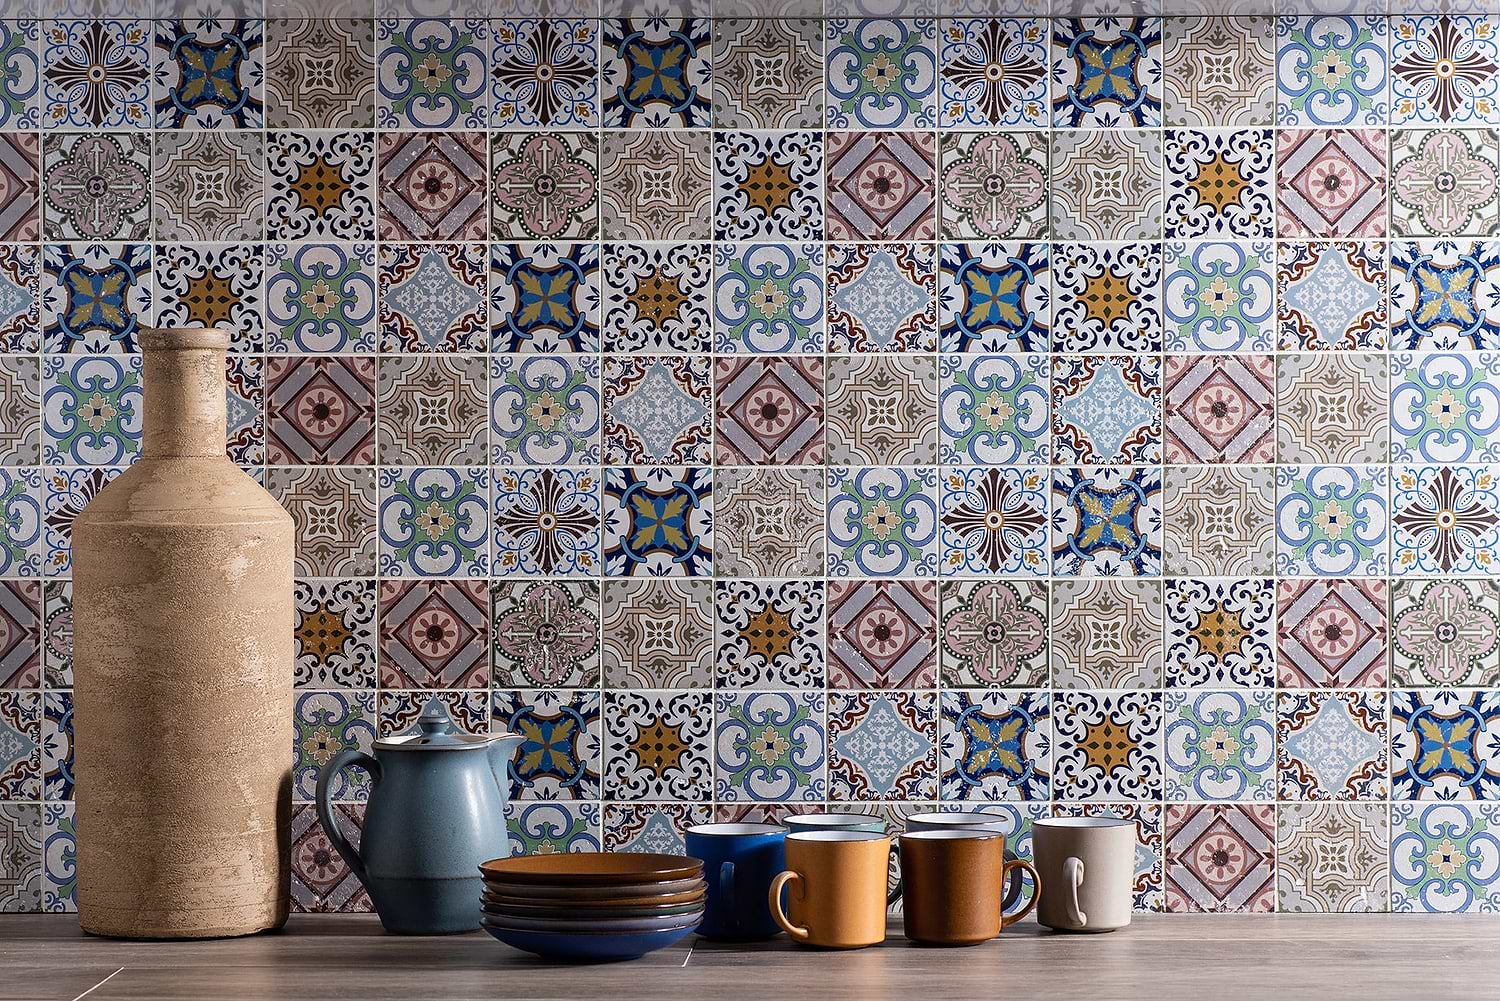 Fable Patterned Mosaic stocked by Hyperion Tiles